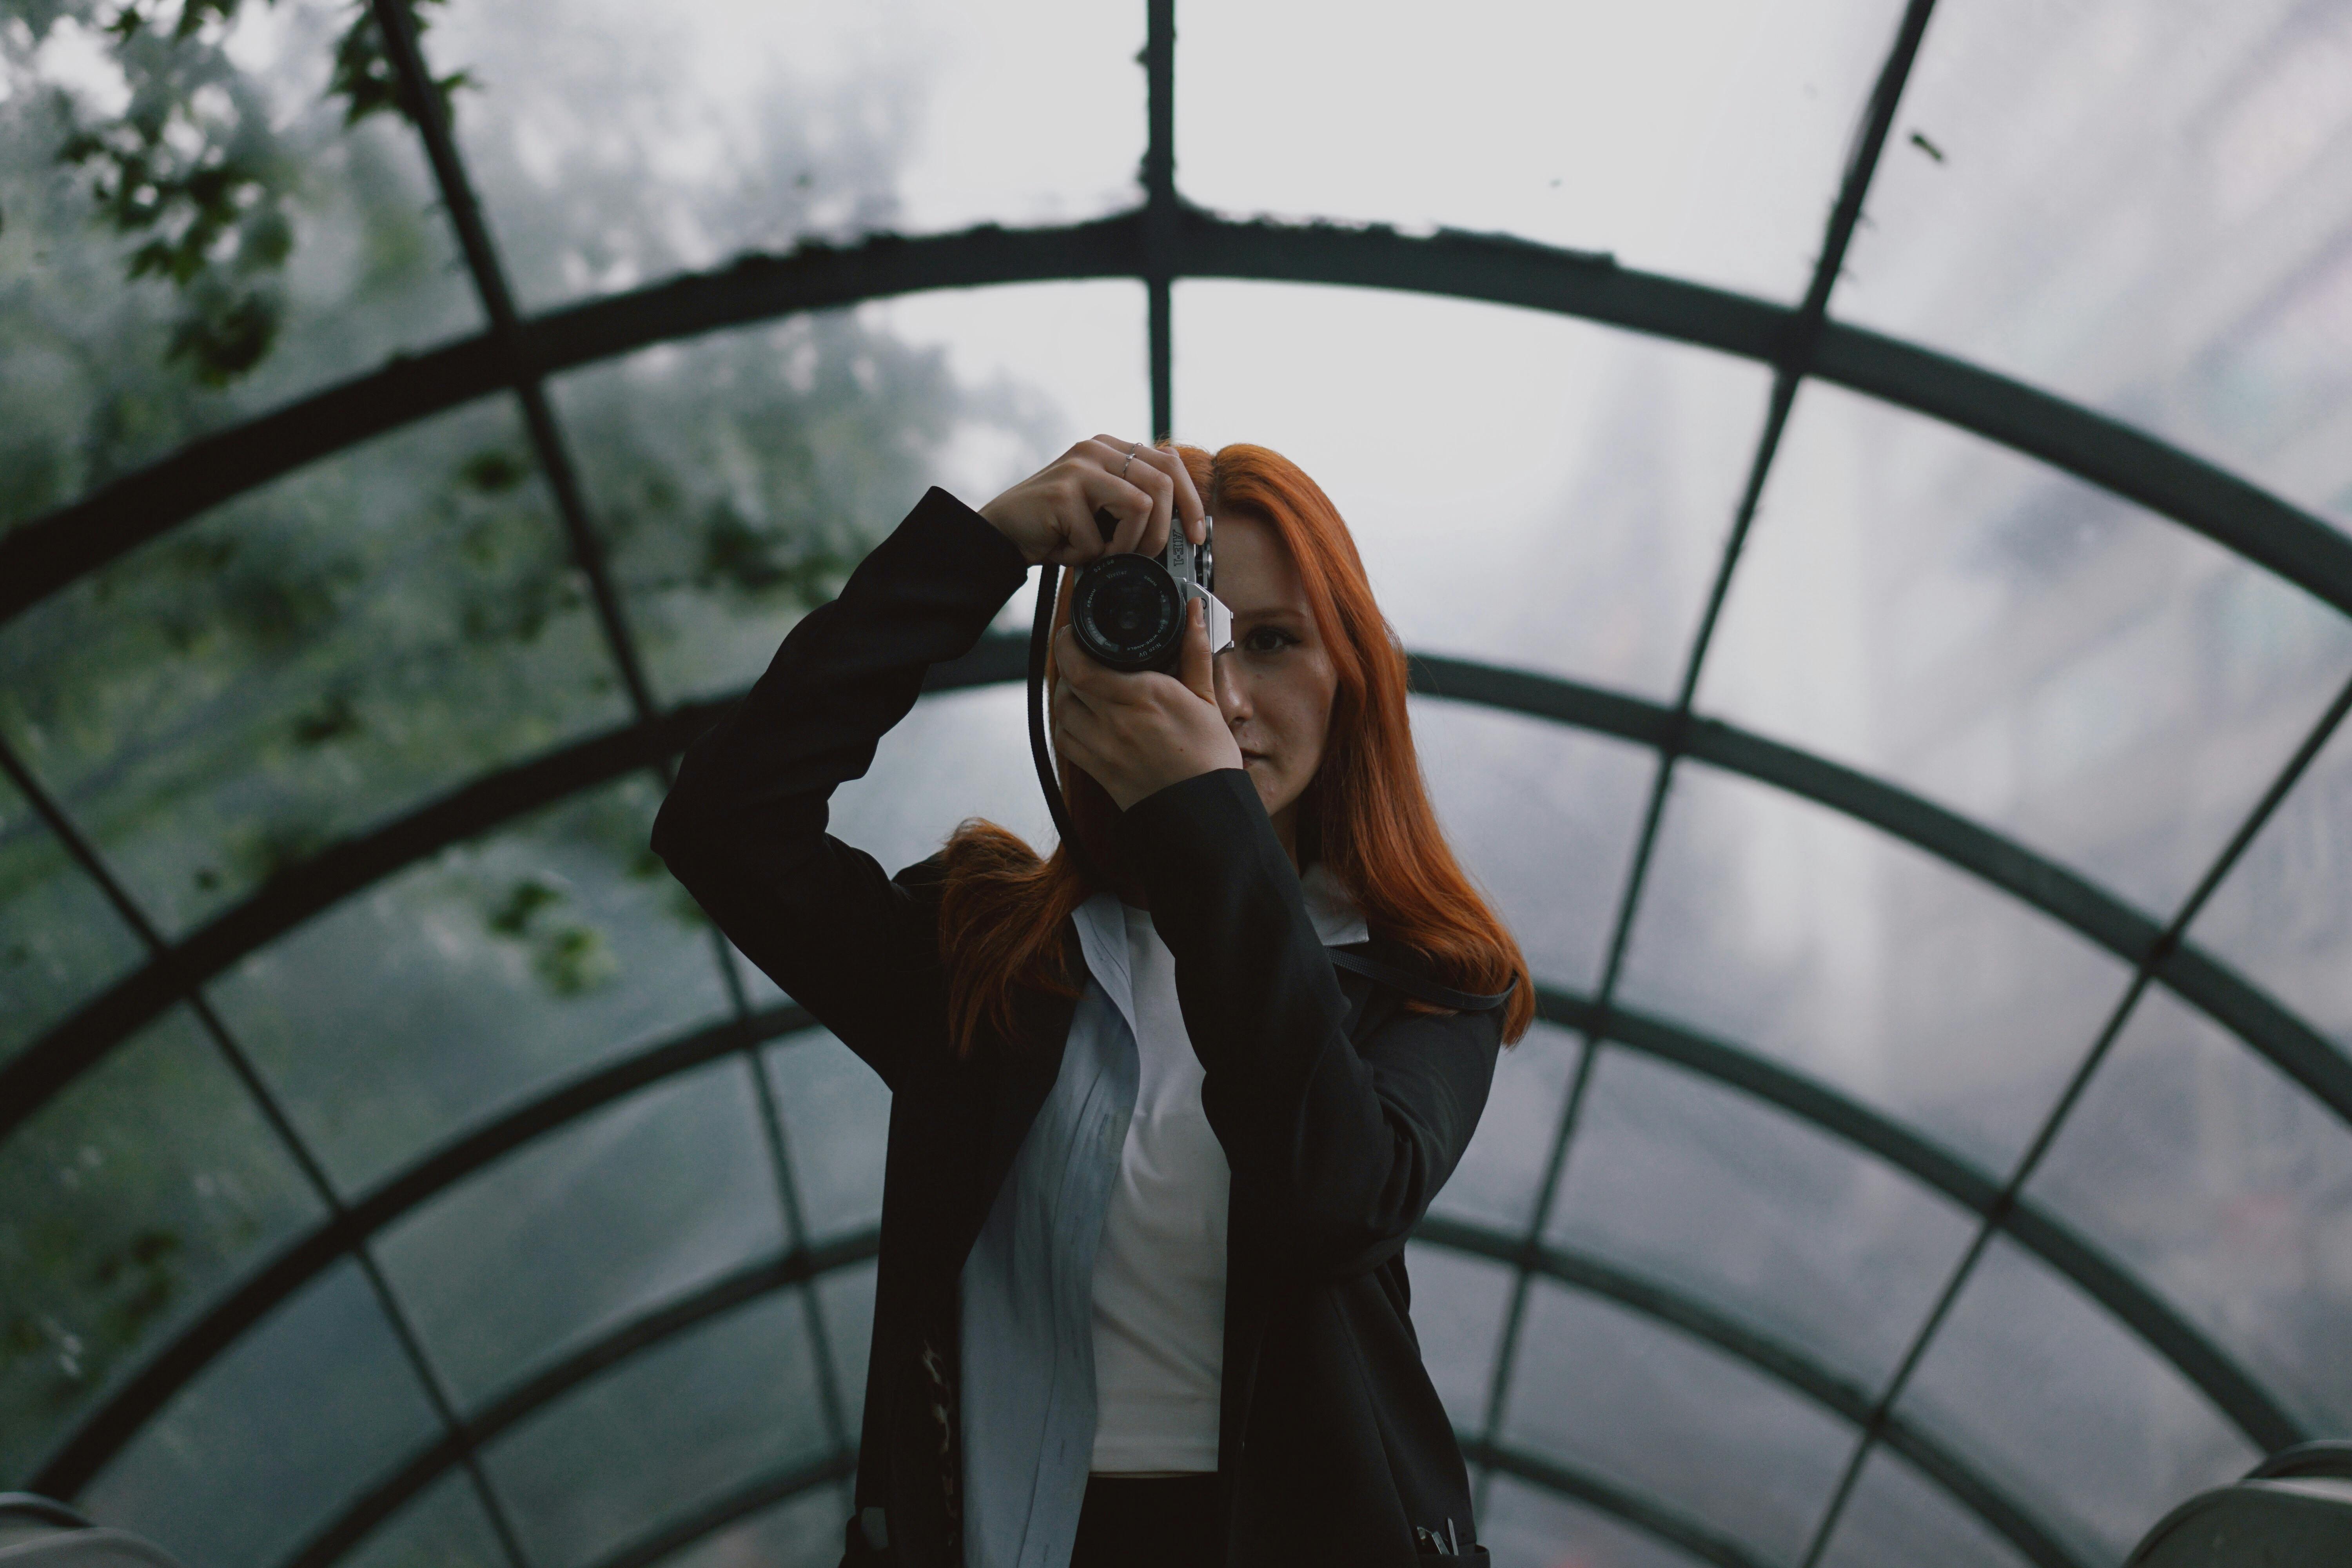 redhead woman taking pictures with camera